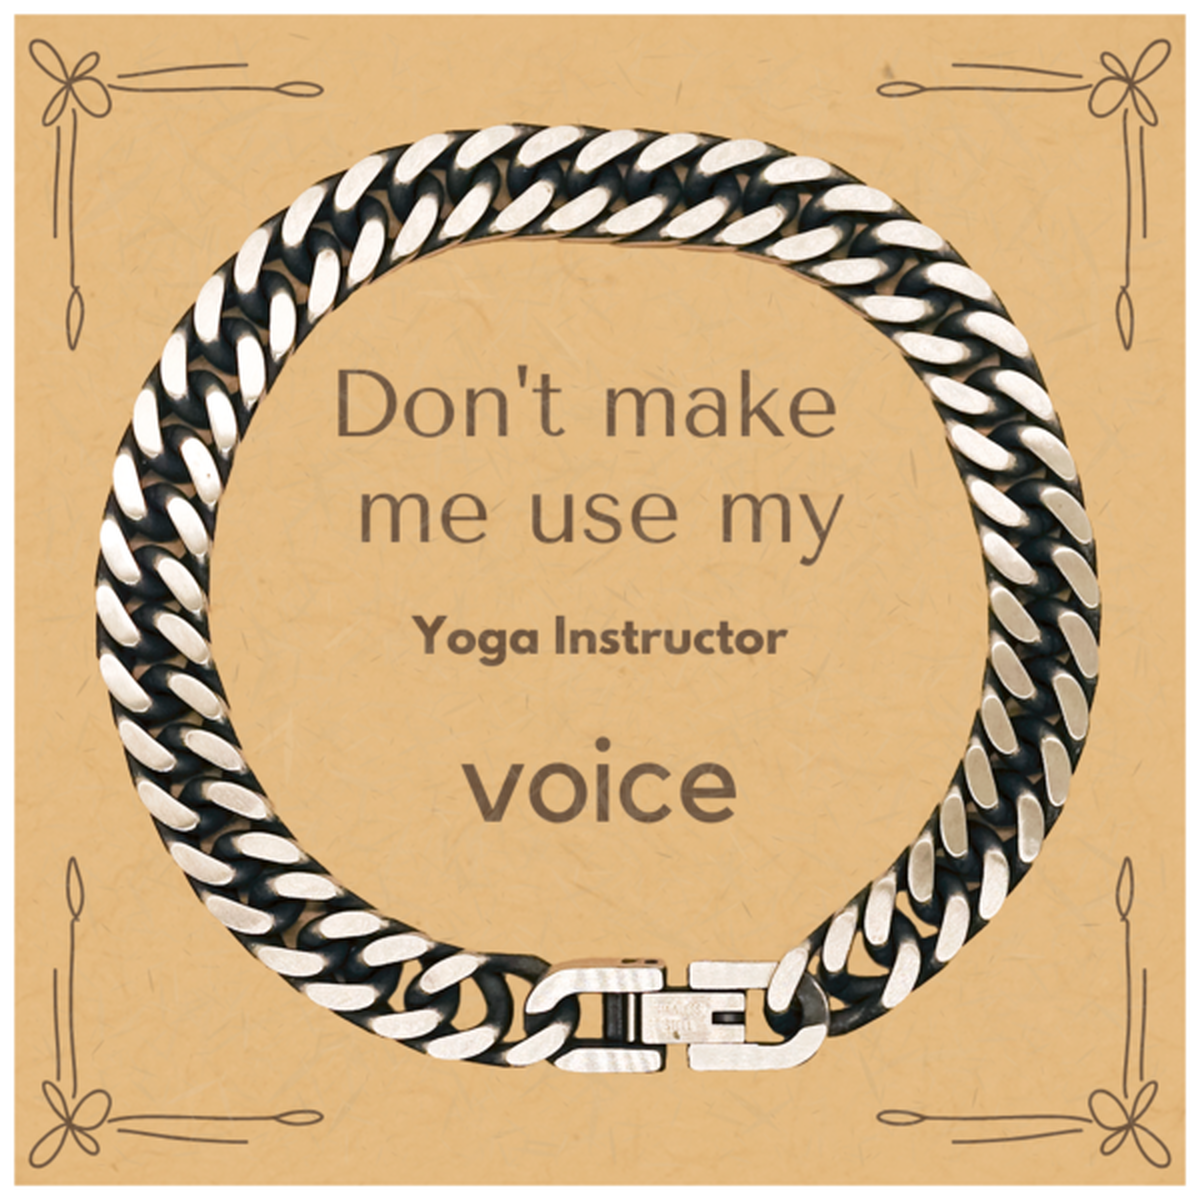 Don't make me use my Yoga Instructor voice, Sarcasm Yoga Instructor Card Gifts, Christmas Yoga Instructor Cuban Link Chain Bracelet Birthday Unique Gifts For Yoga Instructor Coworkers, Men, Women, Colleague, Friends